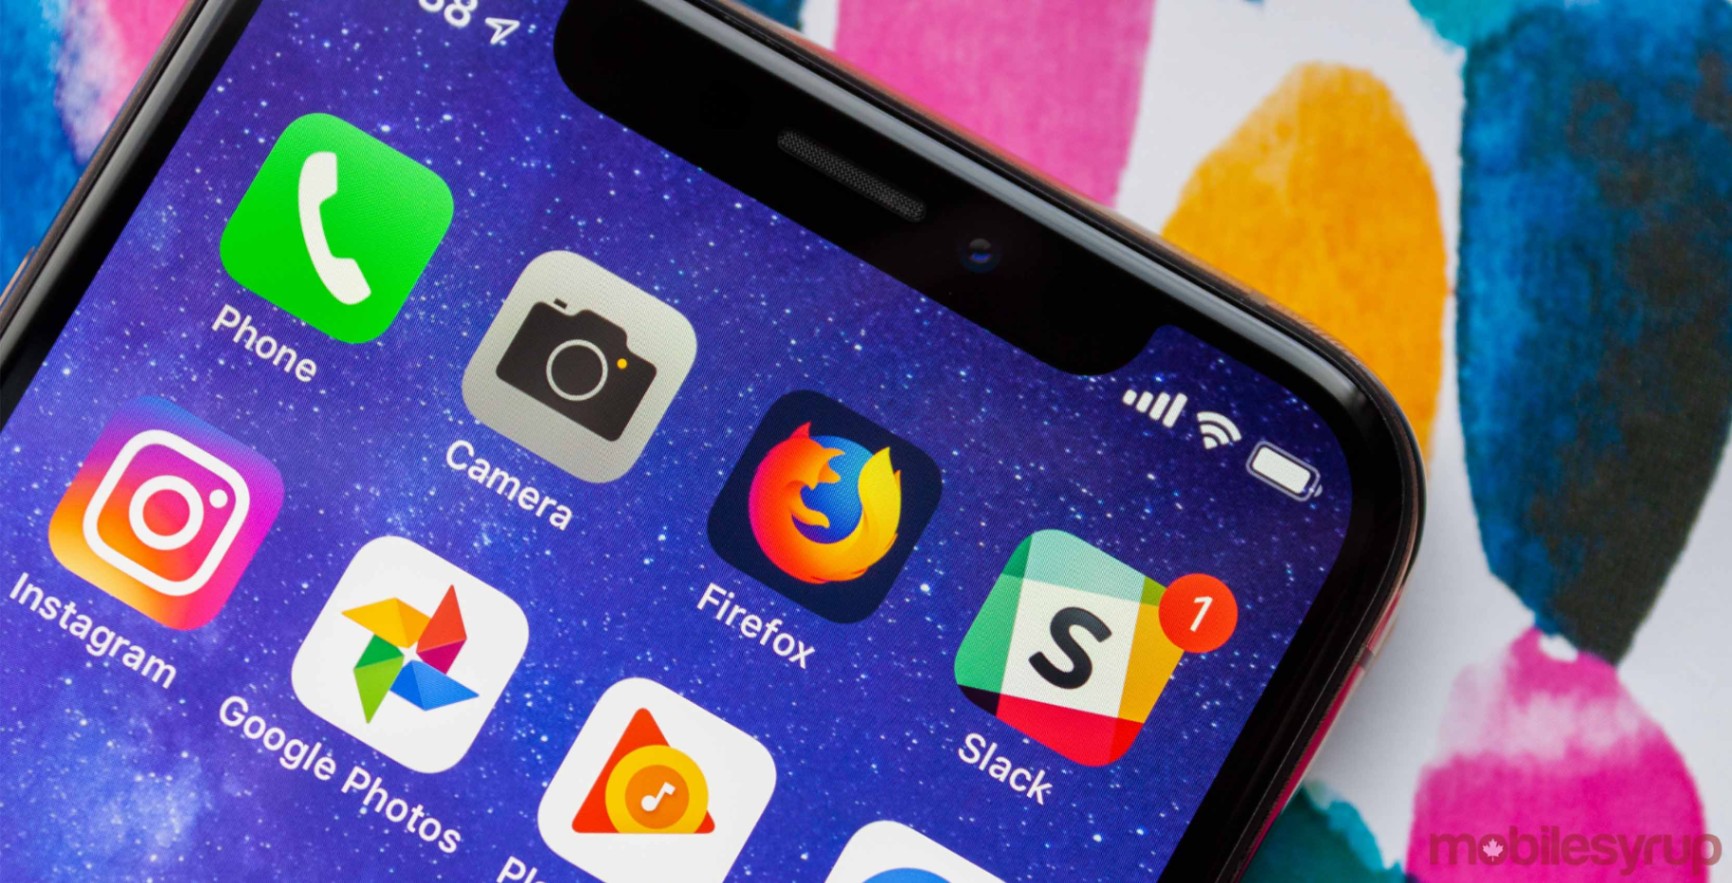 Firefox - Check Out Some Tips on How to Use the App on an Android